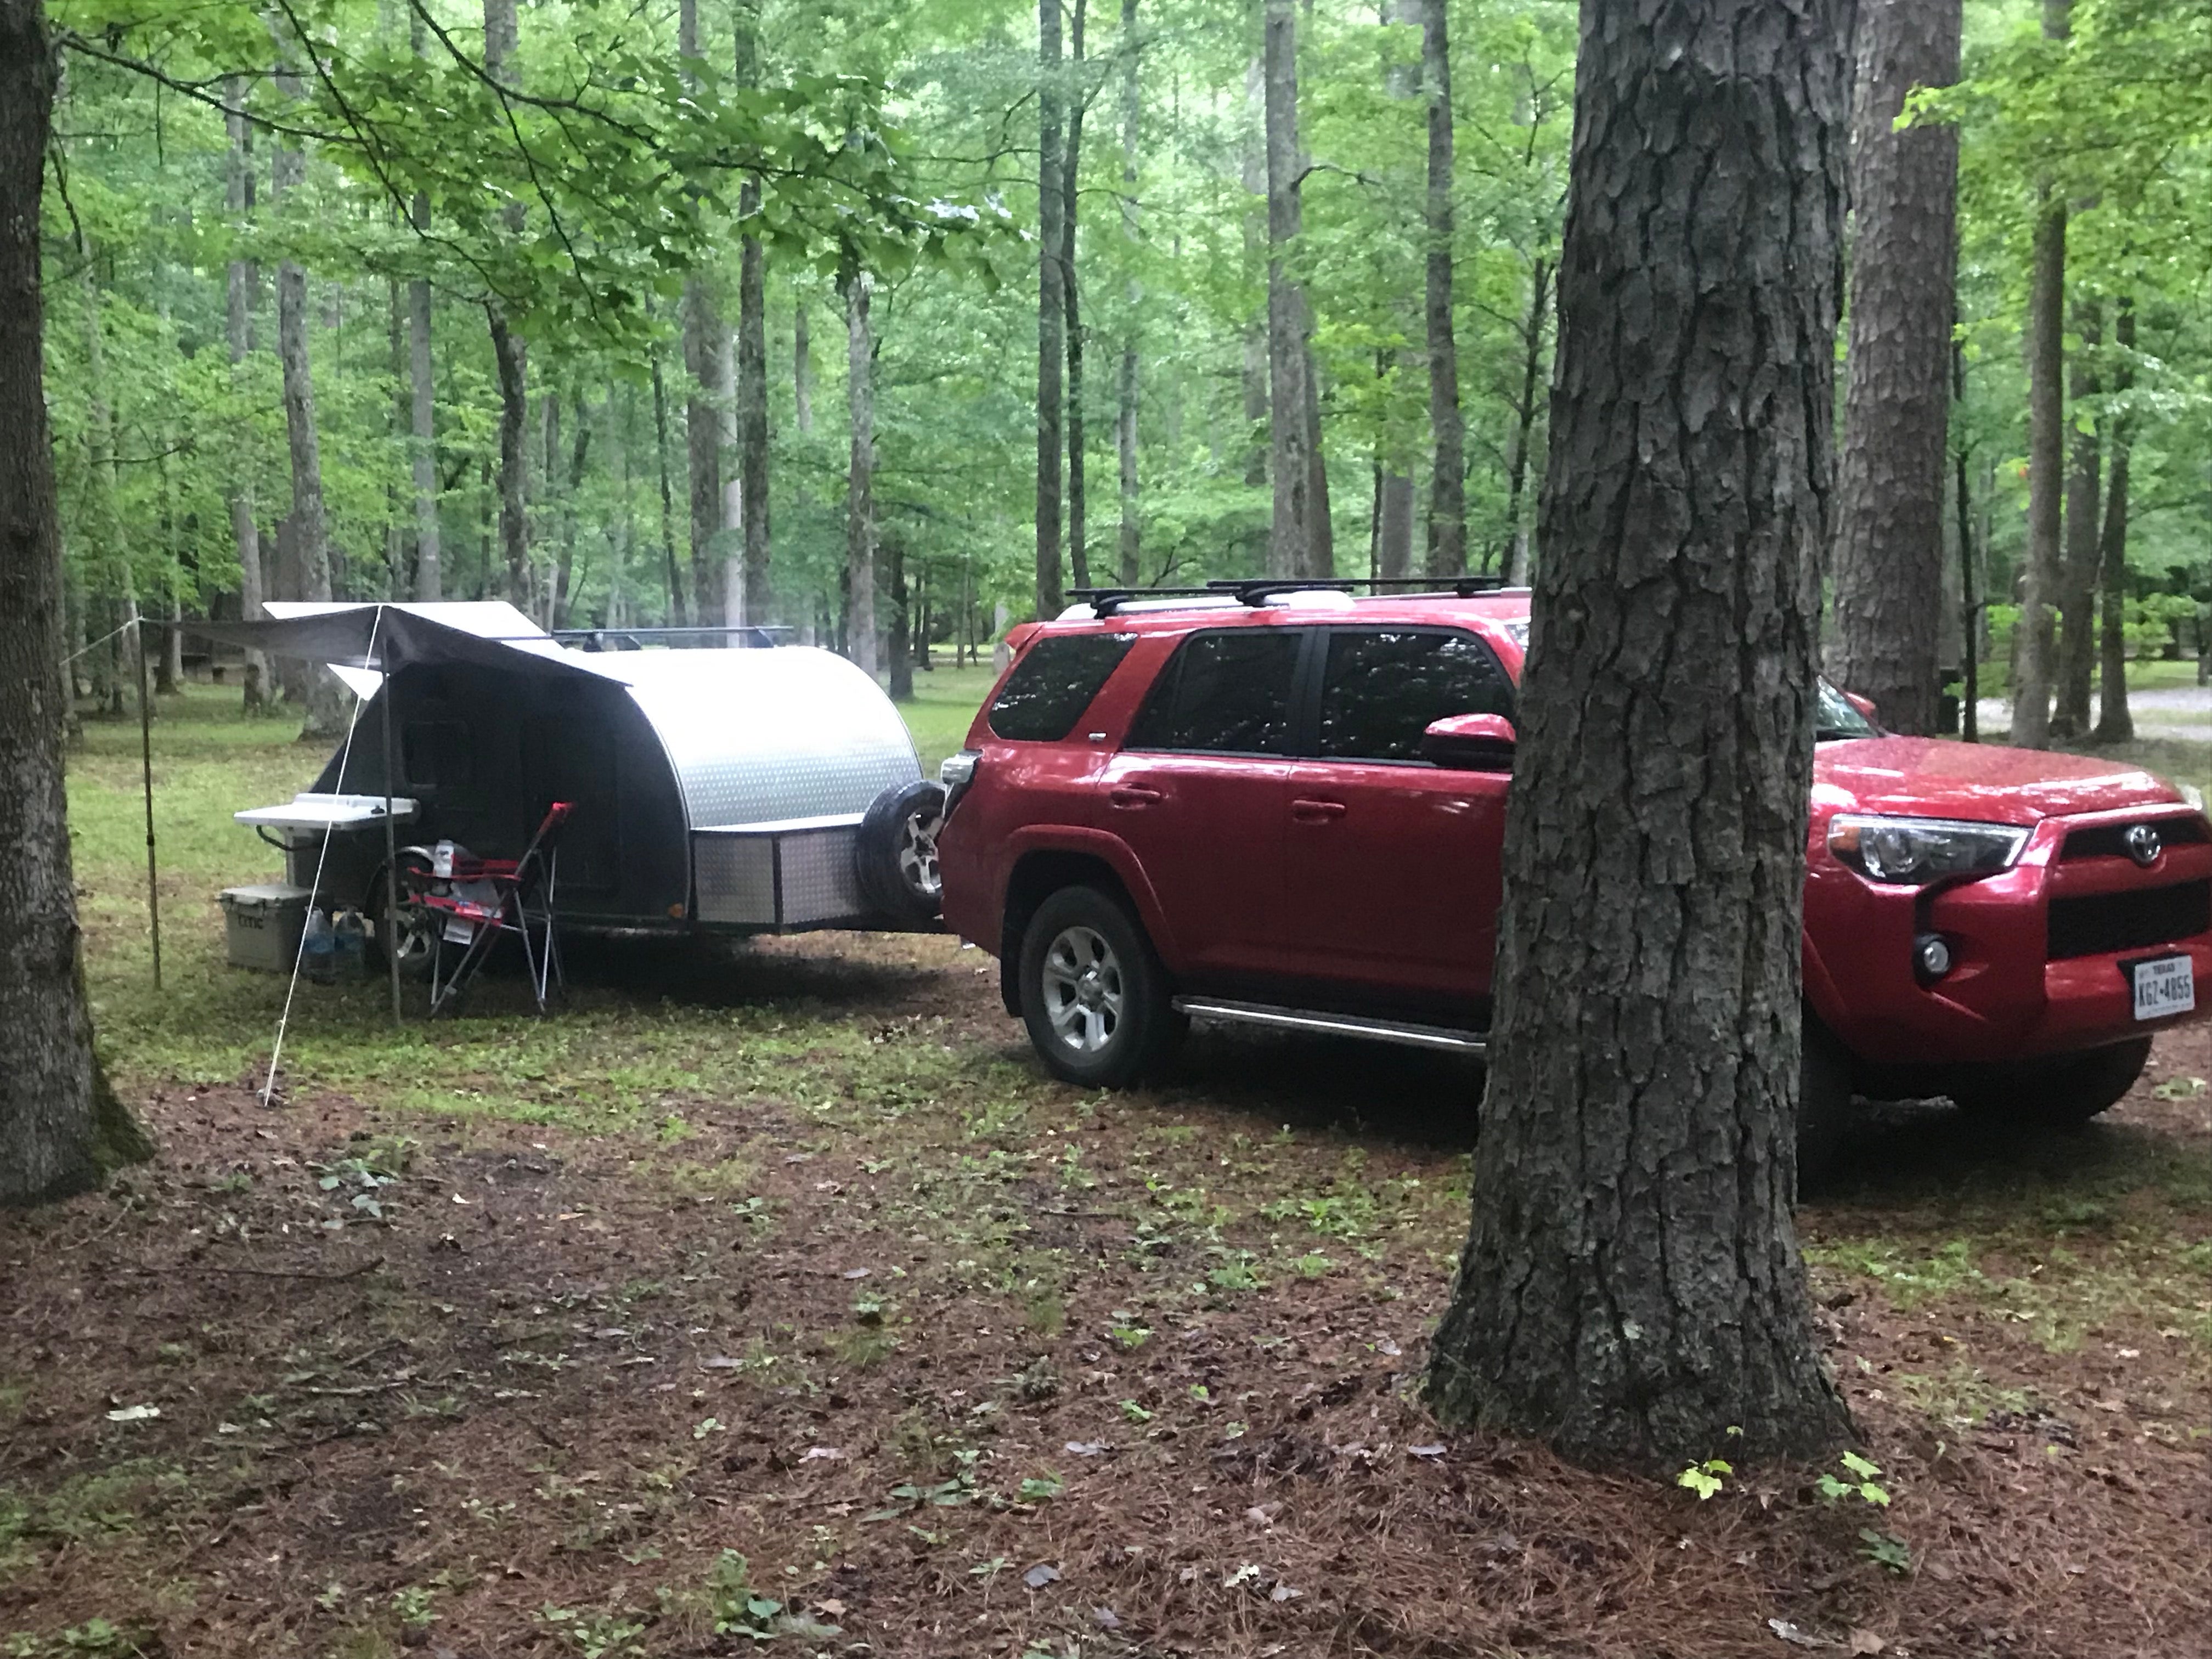 Camper submitted image from Pine Glen Recreation Area - 2